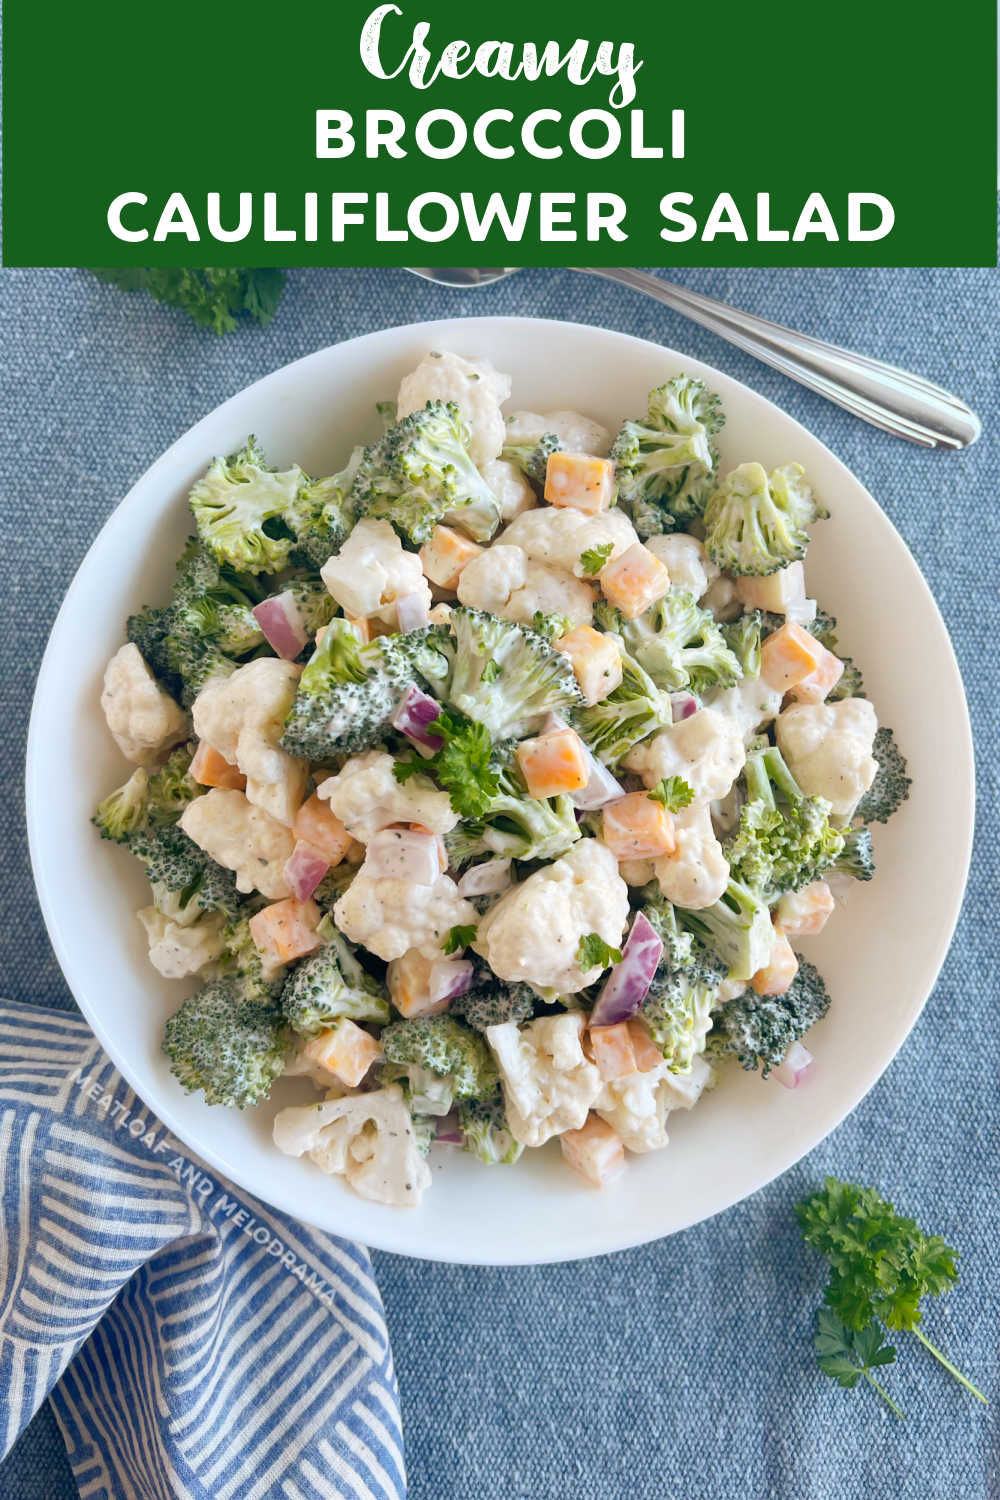 This easy Broccoli Cauliflower Salad Recipe with a homemade creamy dressing is the perfect side dish for family gatherings or a potluck dinner. A delicious side salad that goes well with almost any main dish! via @meamel